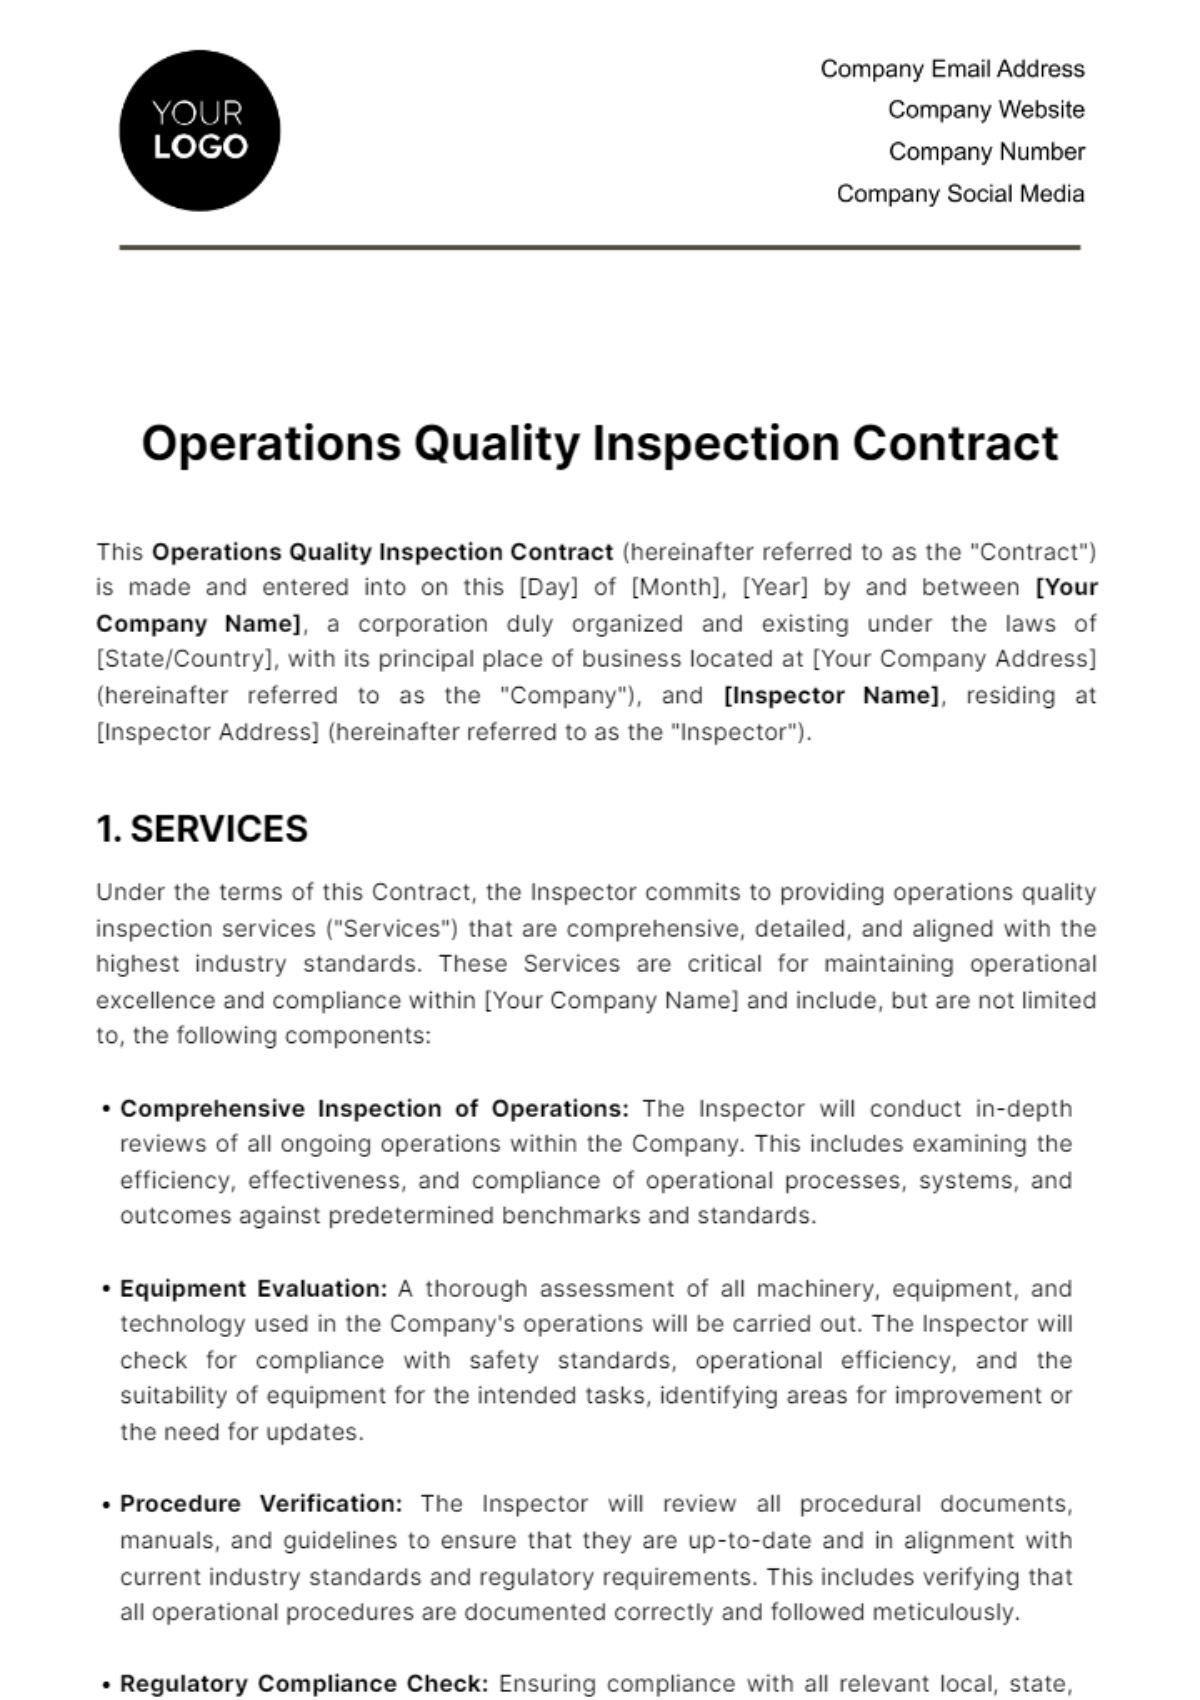 Free Operations Quality Inspection Contract Template